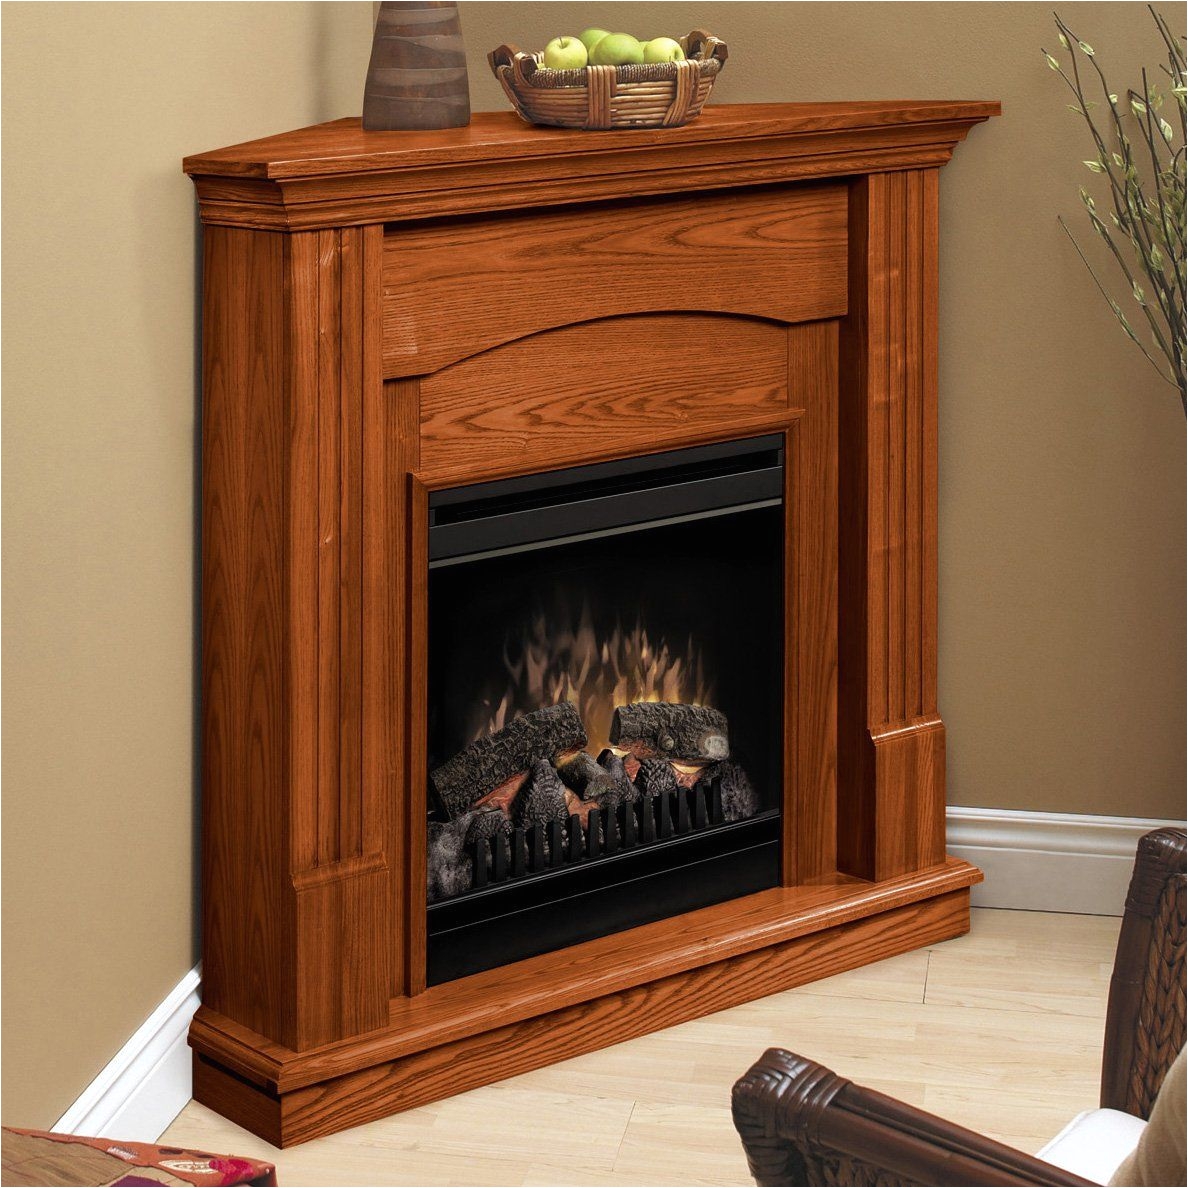 best corner fireplace ideas for your home cornerfireplaceideas tags corner electric fireplace corner fireplace tv stand corner gas fireplace corner